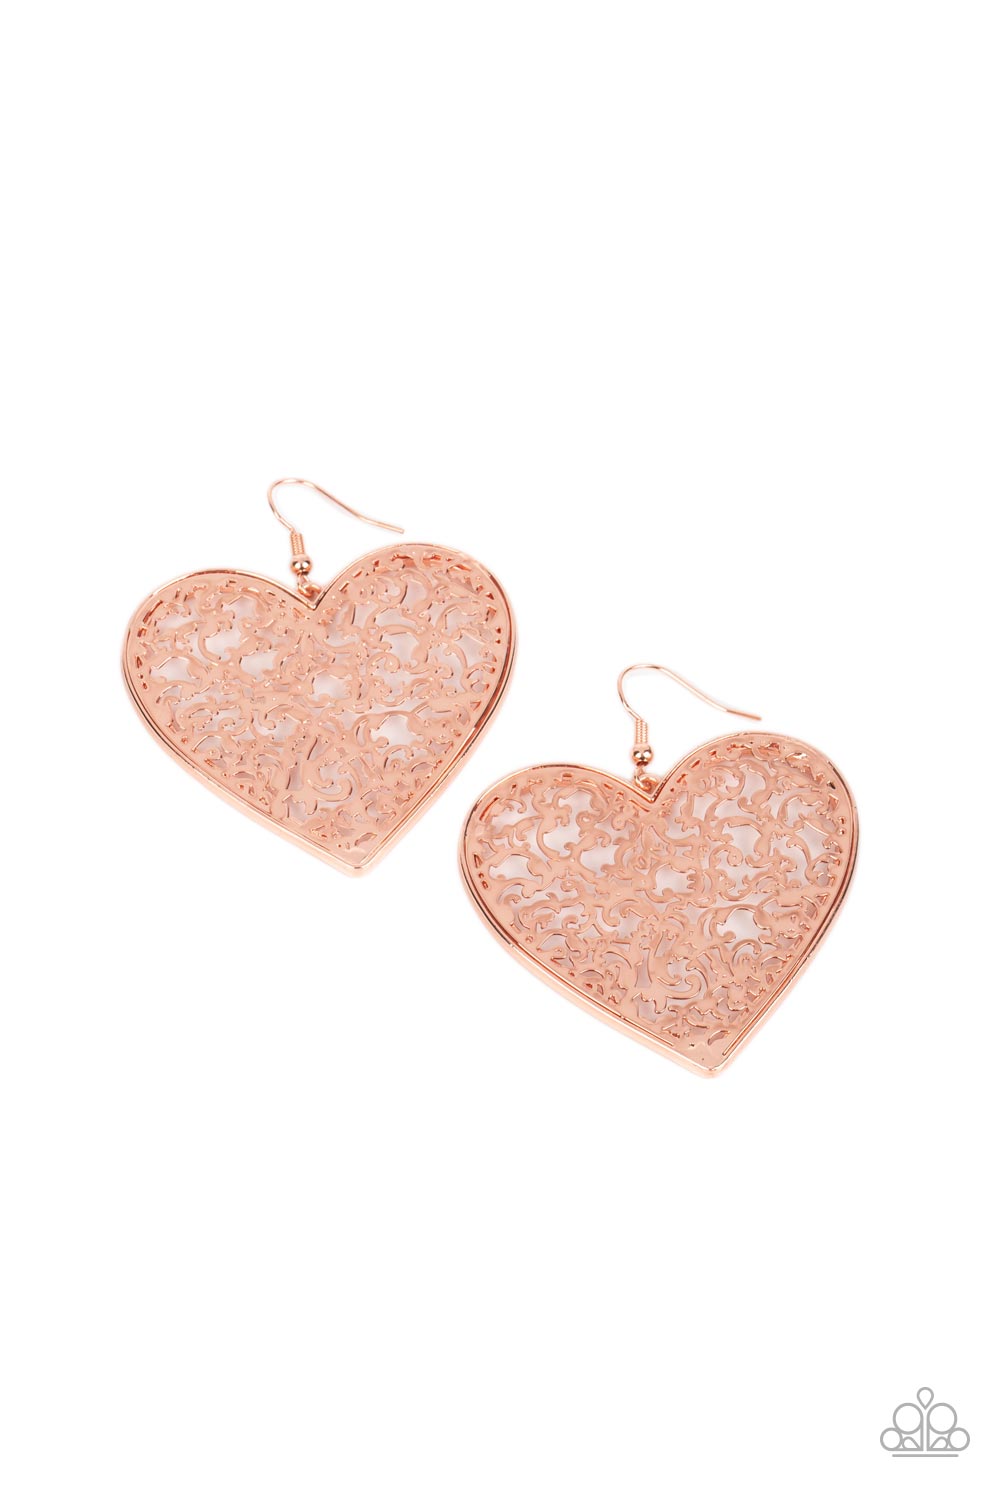 Fairest in the Land - Copper Earrings - Paparazzi Accessories